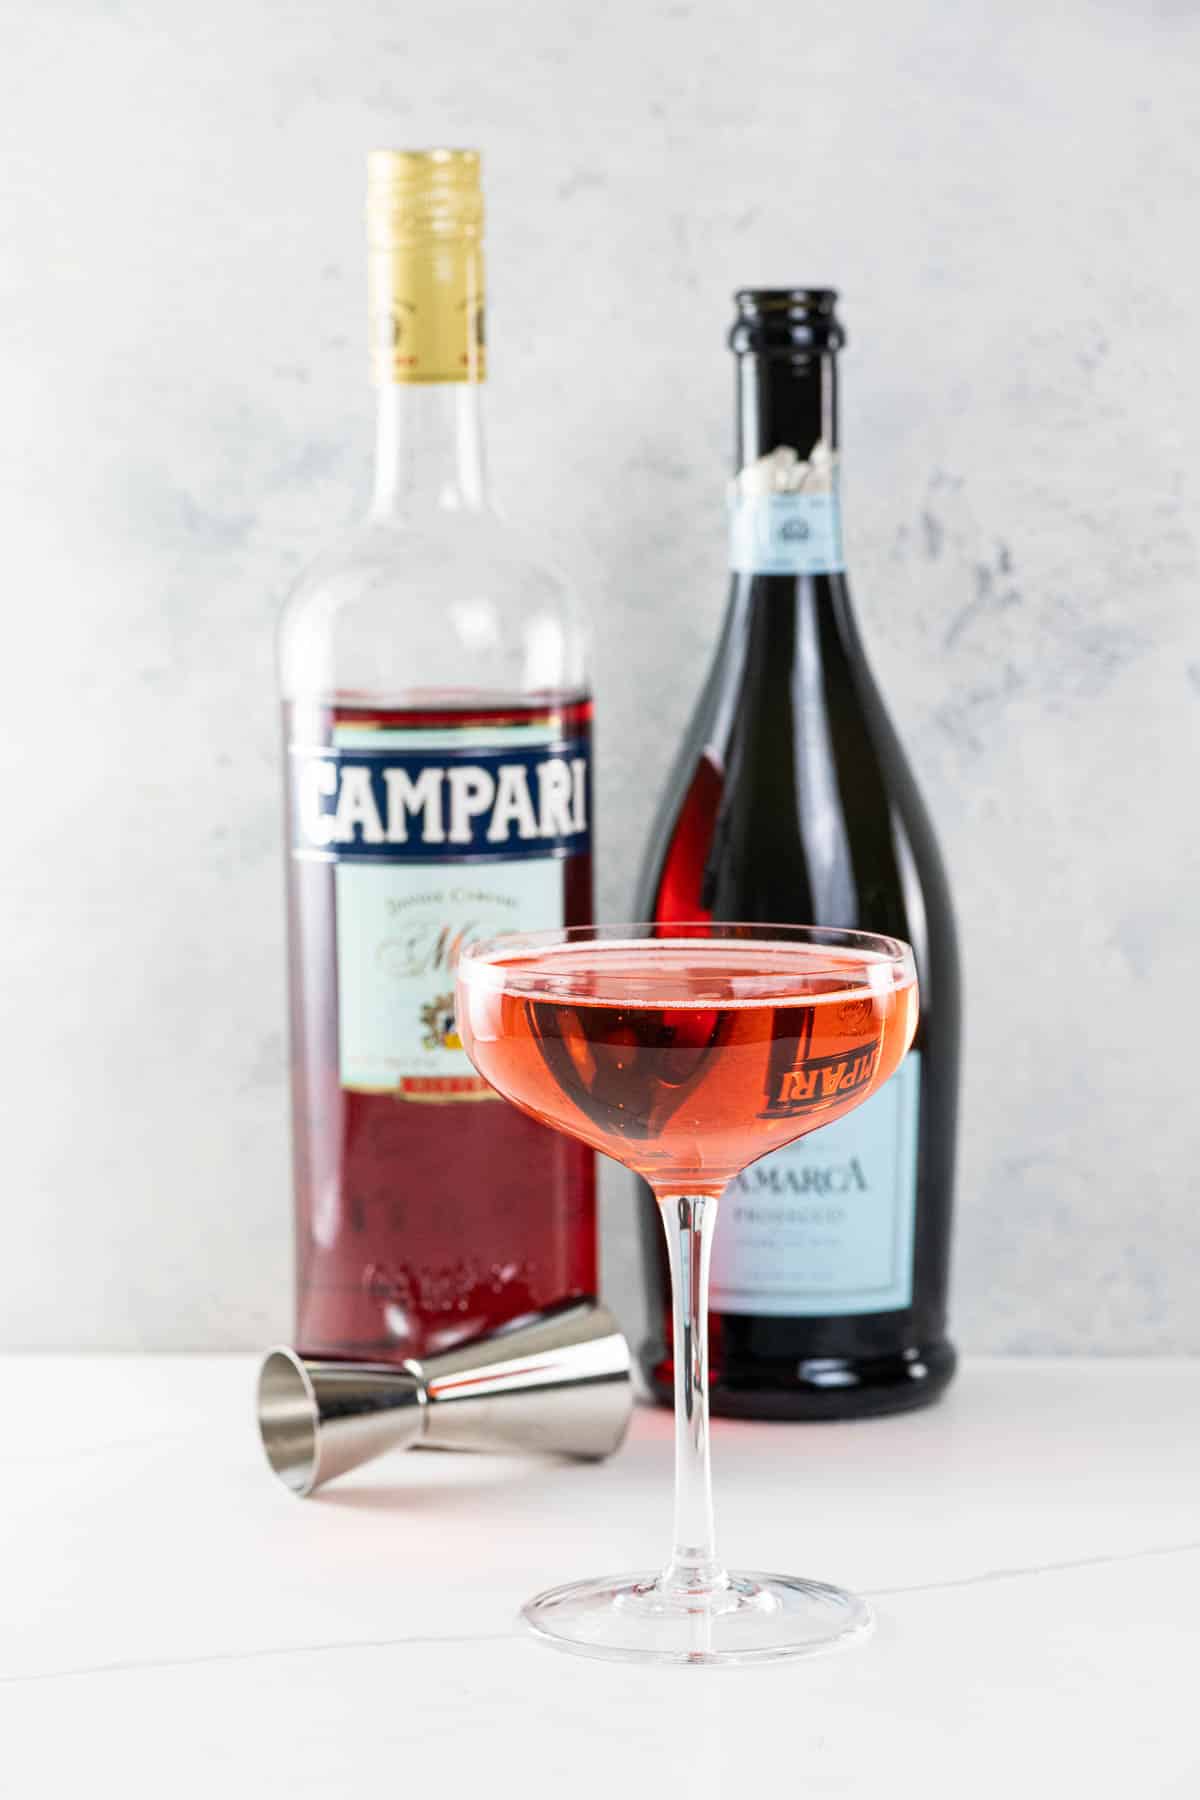 a campari prosecco cocktail (Mom's Italian soda) in a coupe glass with prosecco and campari bottles and a jigger in the background